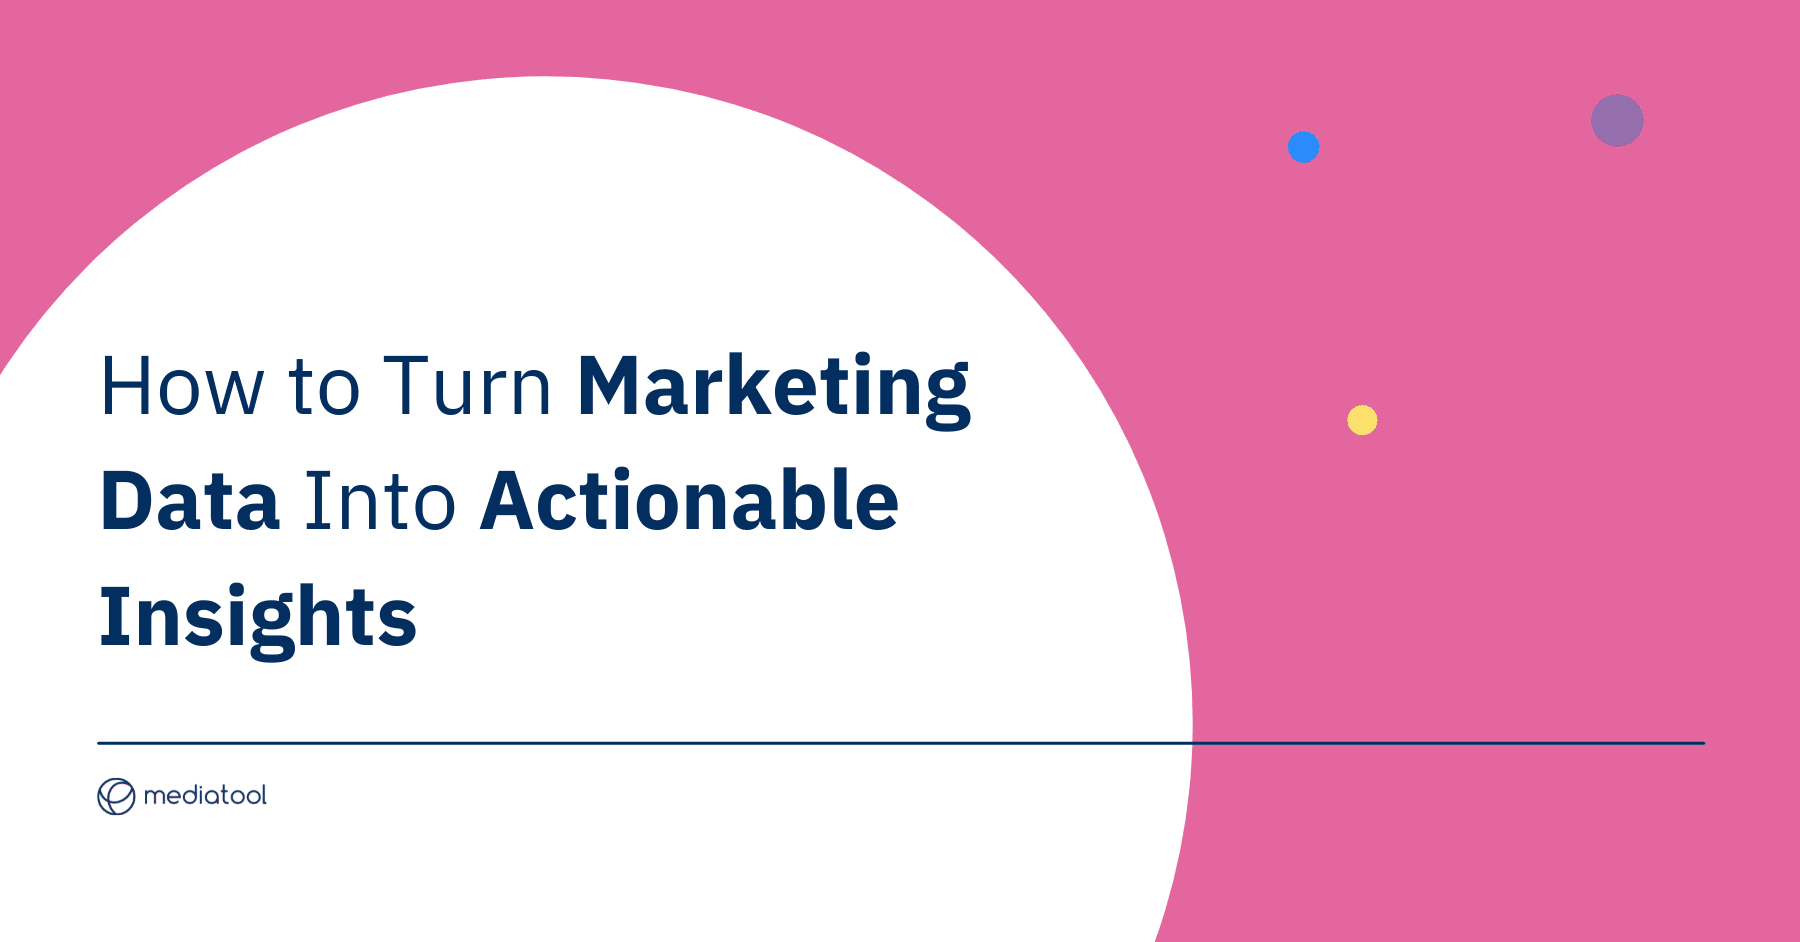 How to turn marketing data into actionable insights